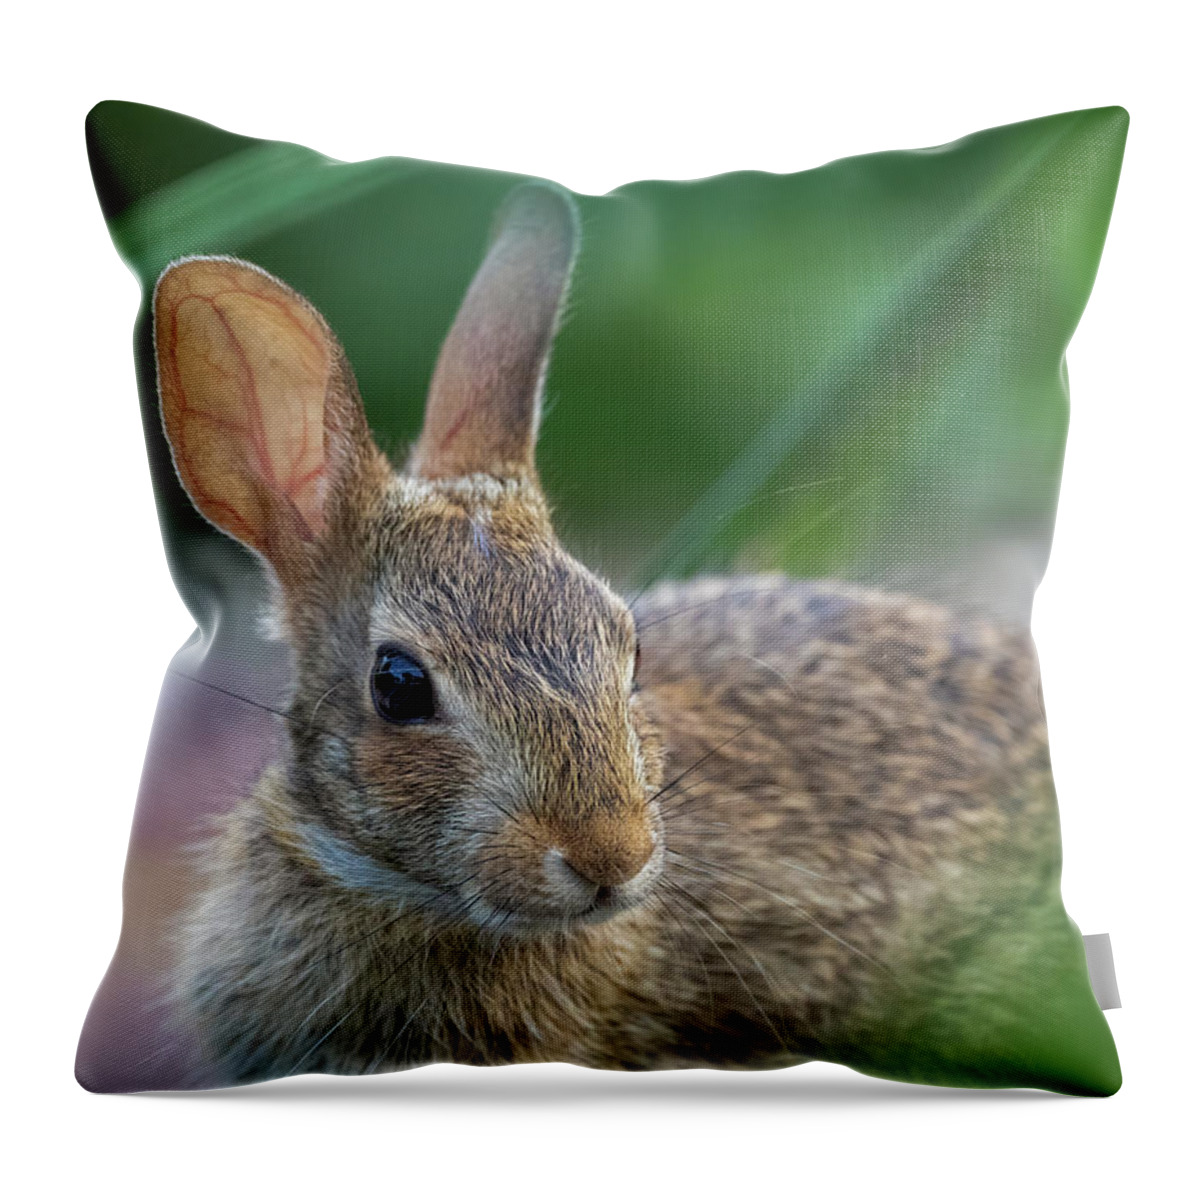 Wildlife Throw Pillow featuring the photograph Eastern Cottontail Rabbit by Lara Morrison